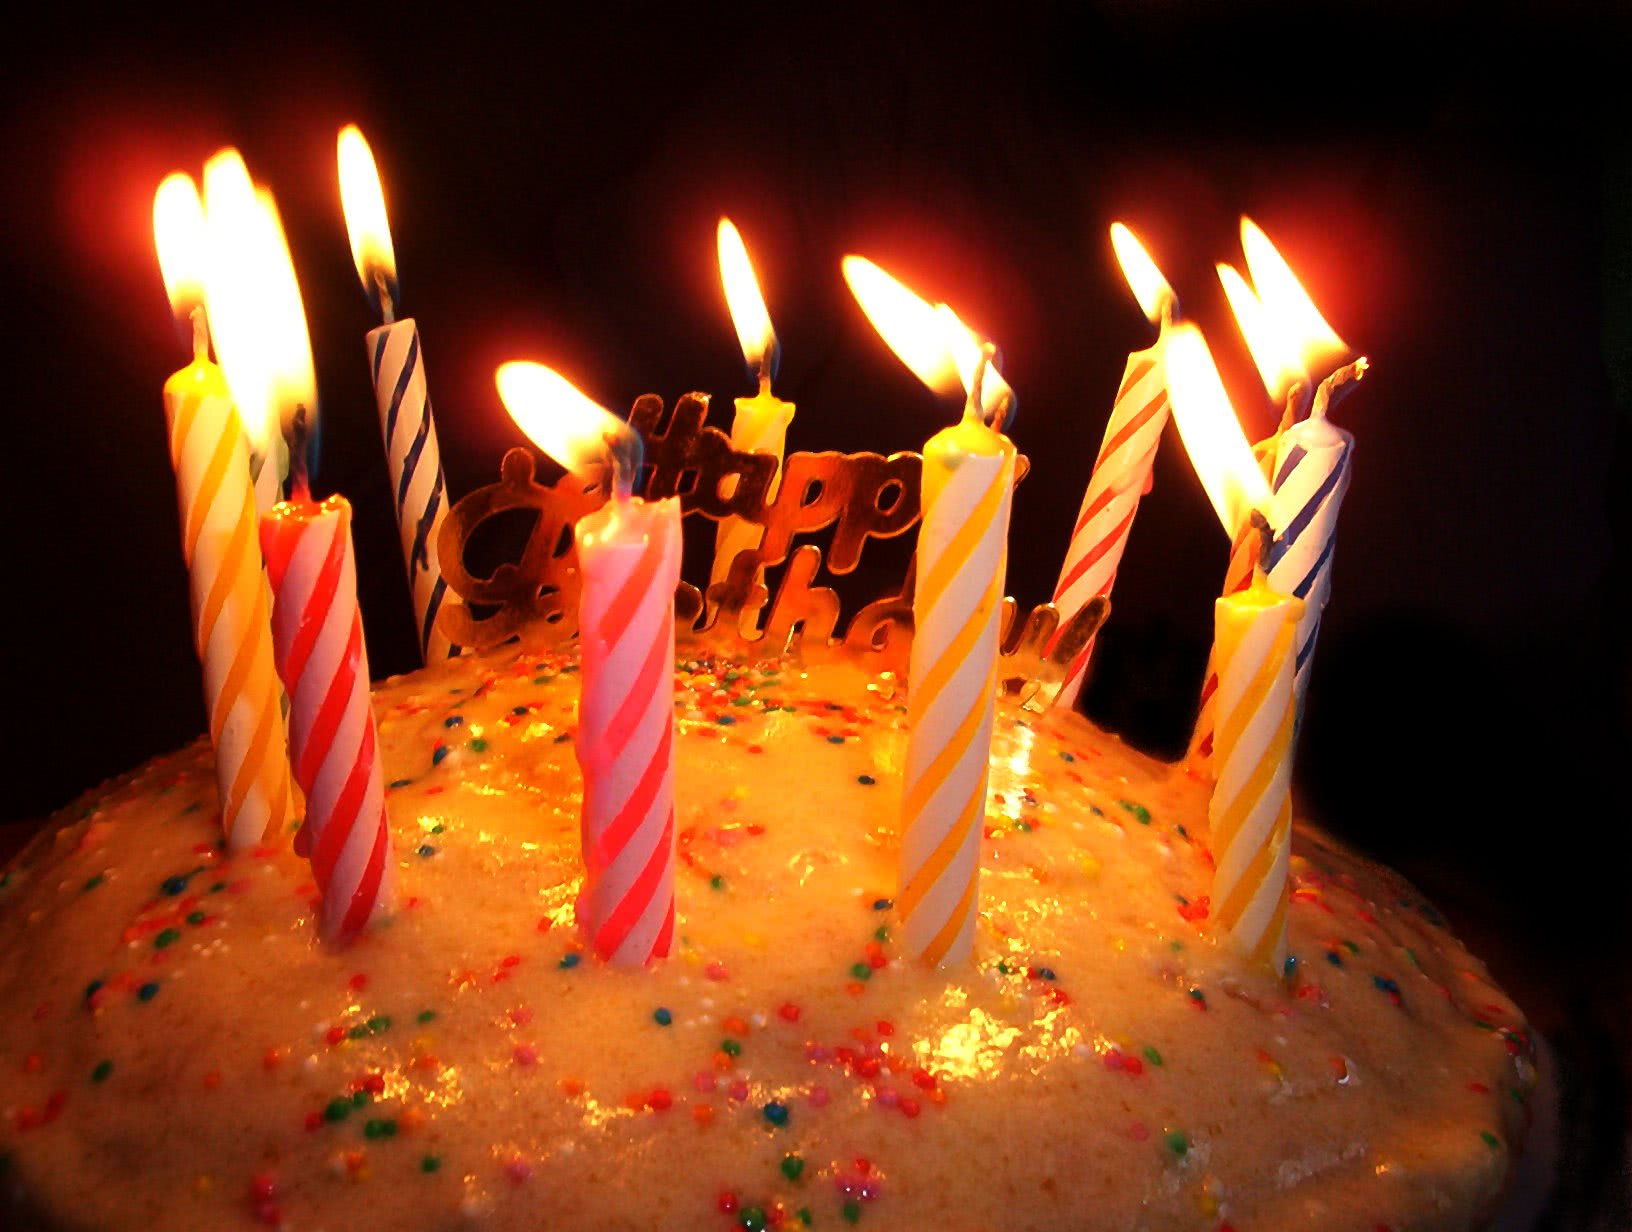 A birthday cake with some candles